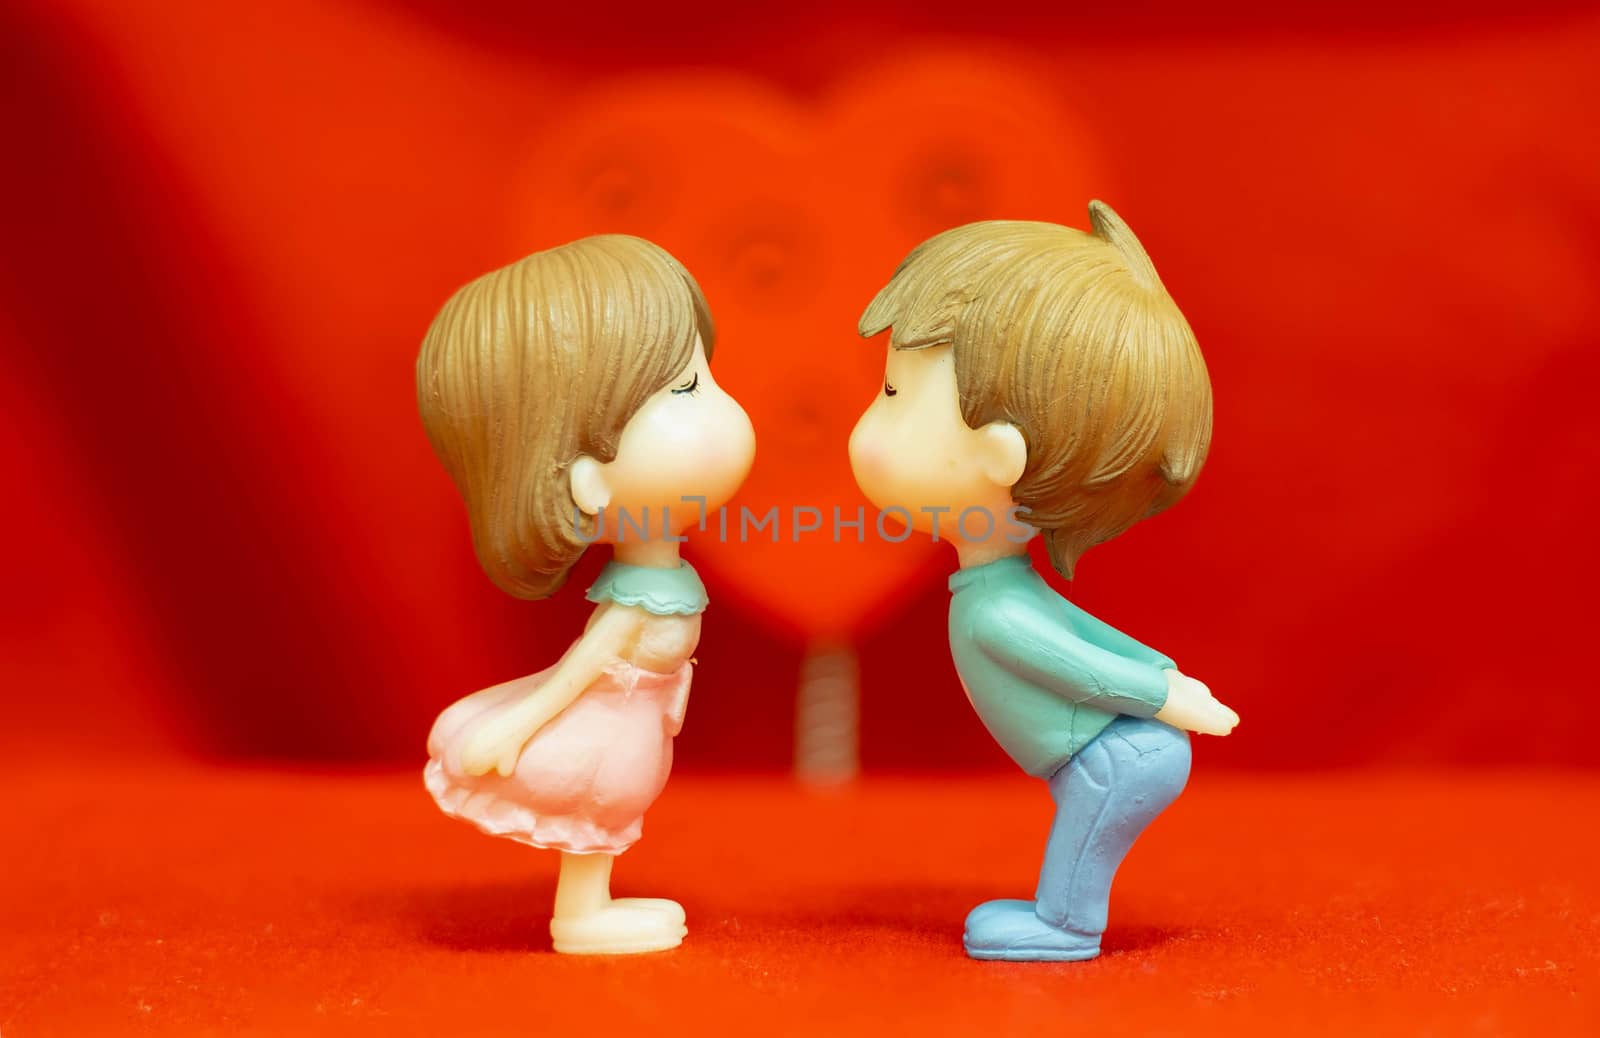 The Miniature Couple dolls Boy and Girl Romantic Kiss on Red Heart  Background for valentine's Day Concept